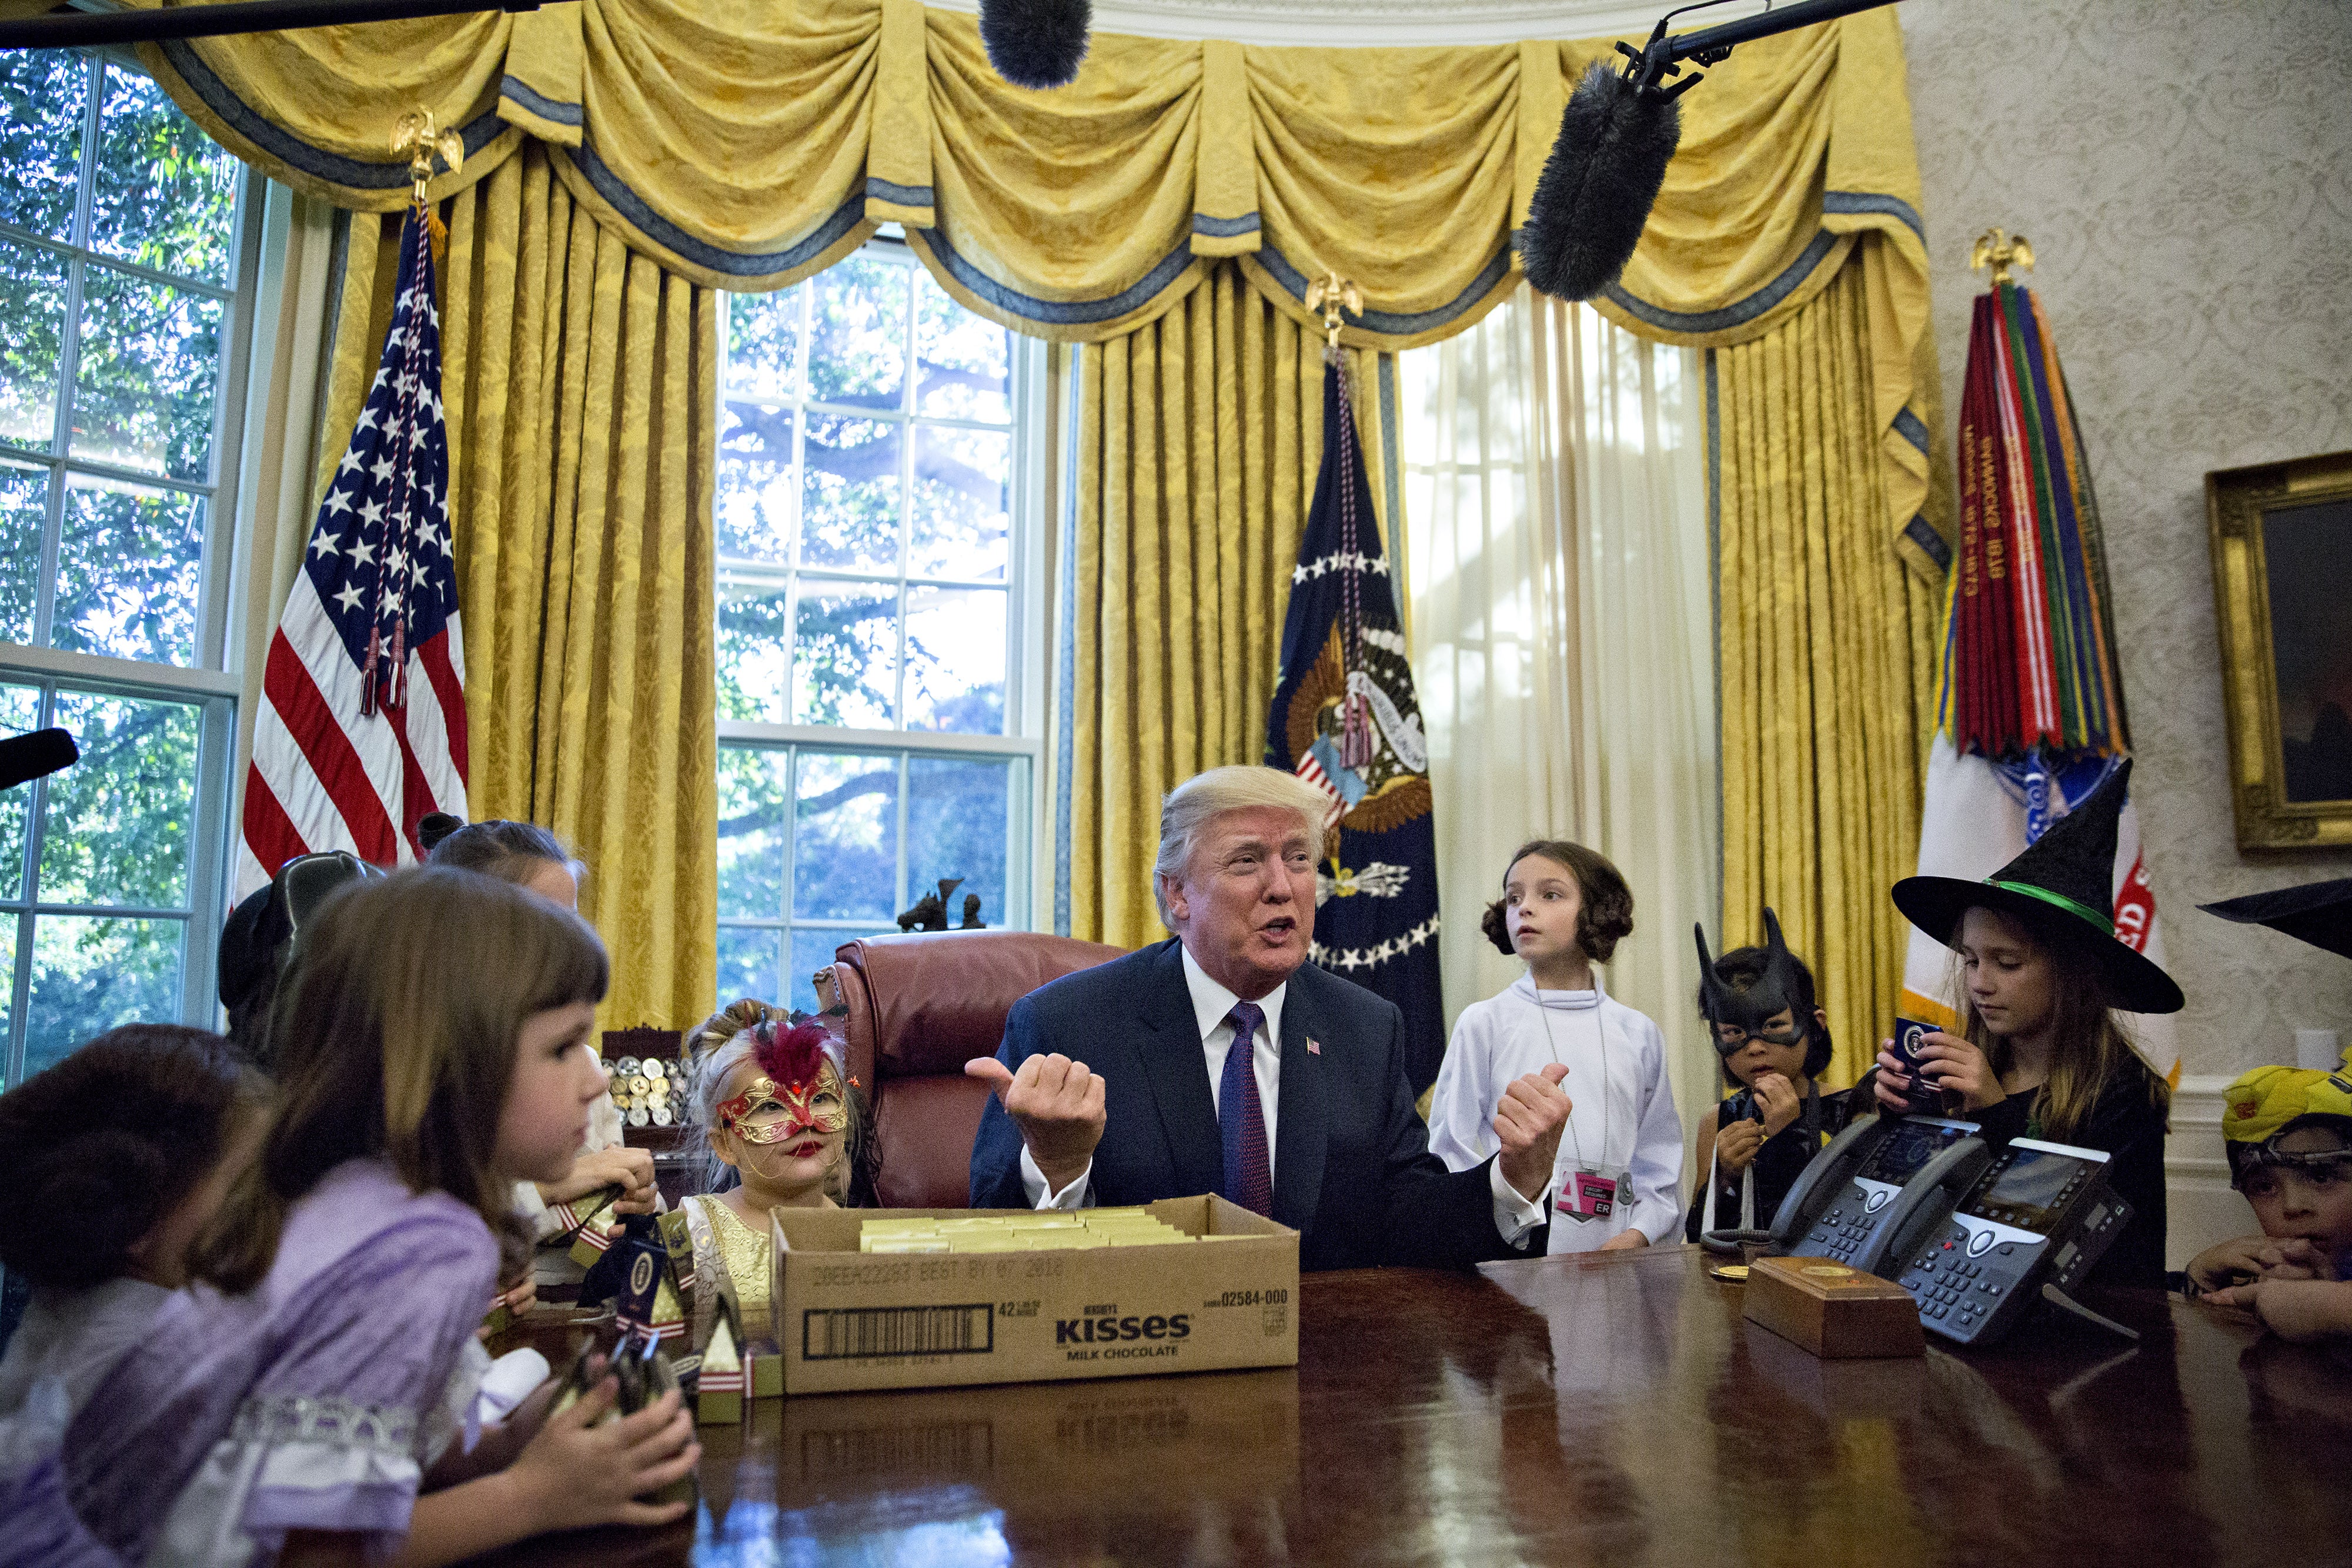 'You Have No Weight Problems, That's the Good News.' President Trump Gives Candy to Children
 
